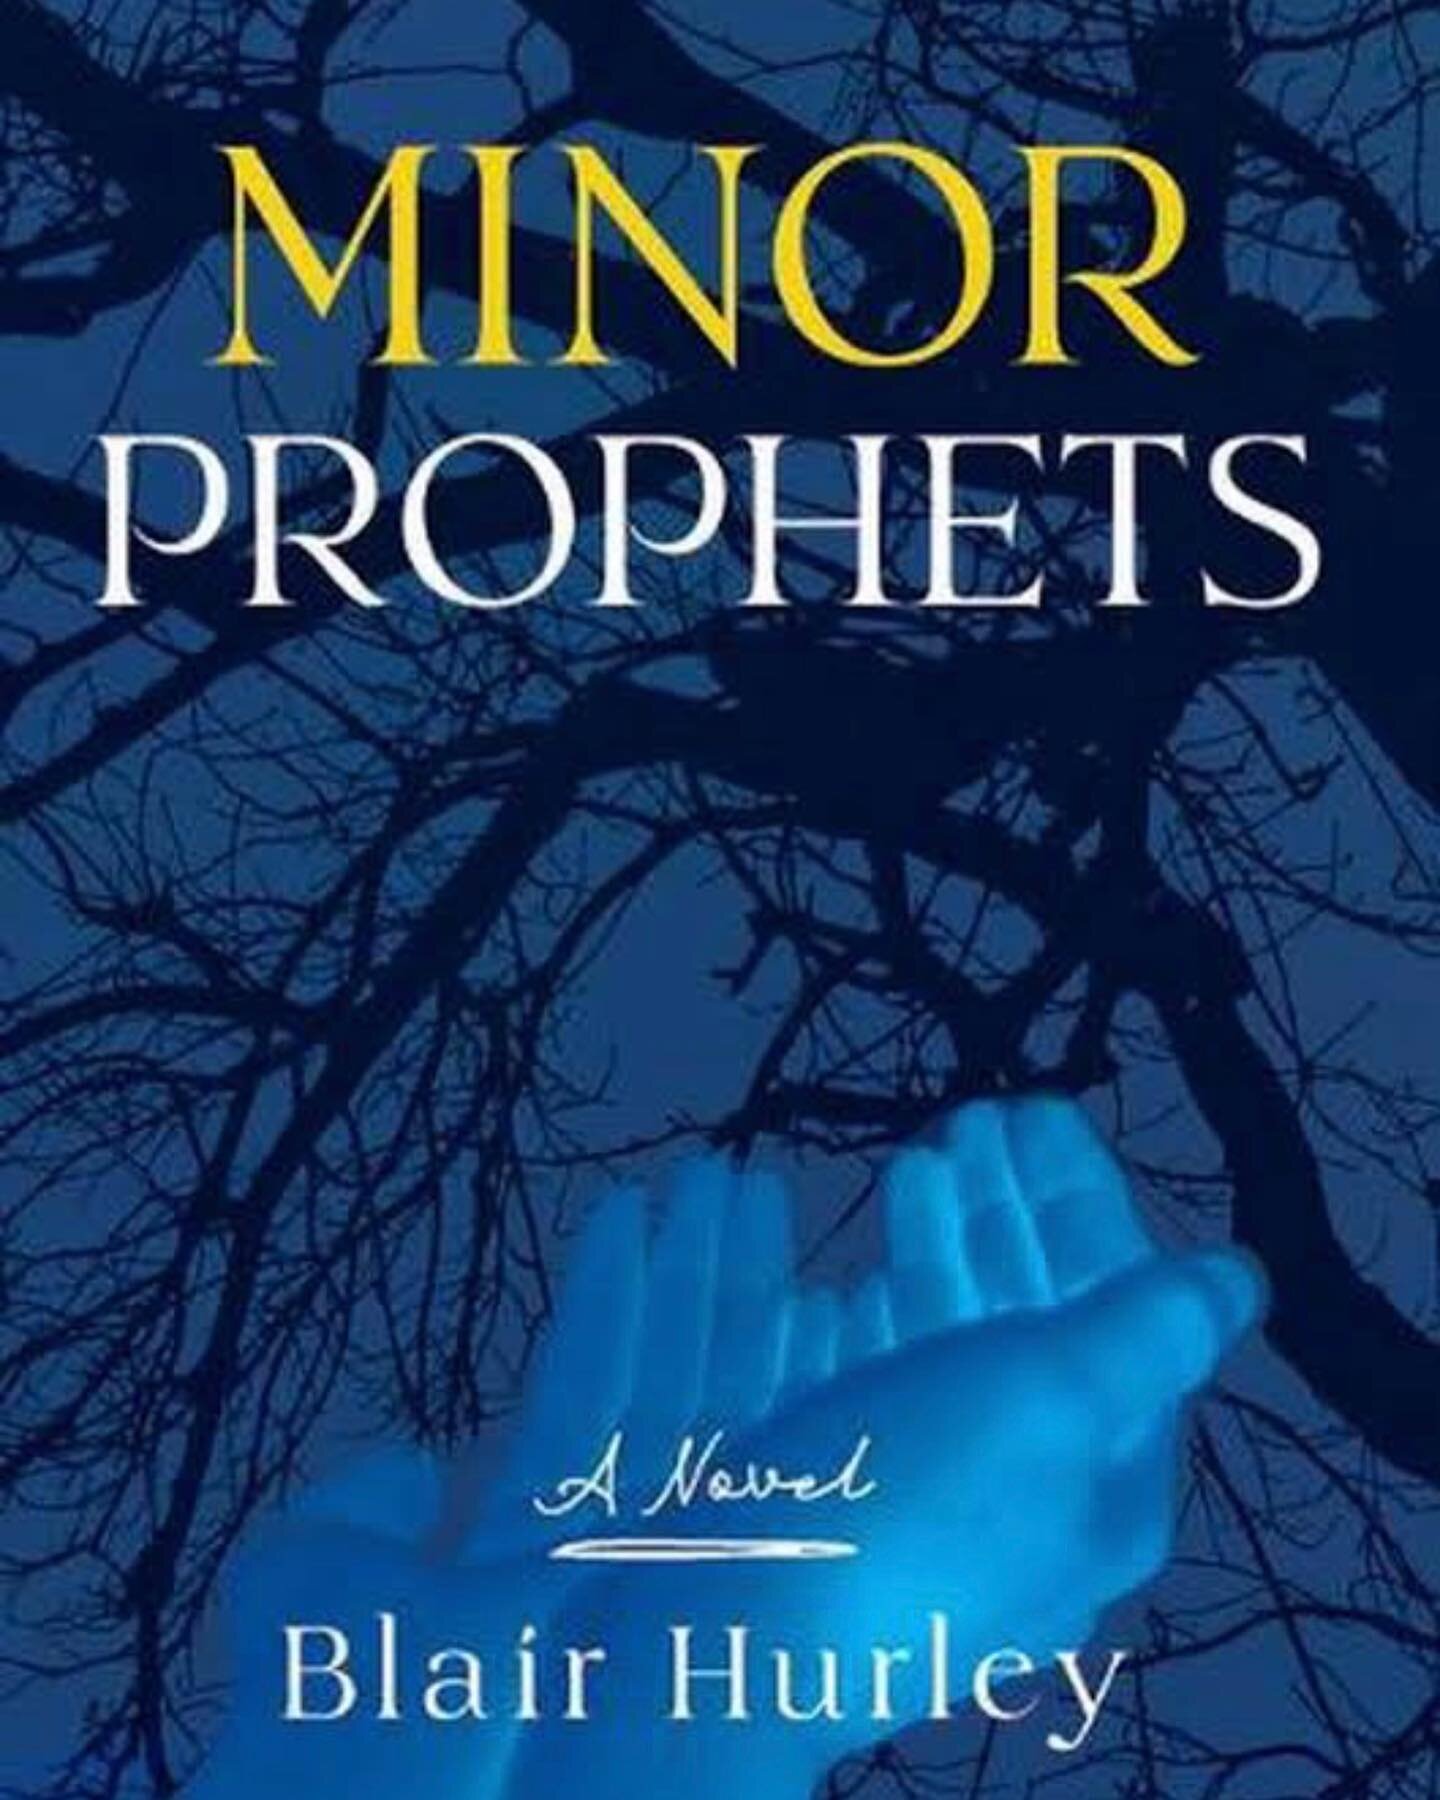 One of our past contributors&rsquo; novels has just been published! Blair Hurley is the author of &ldquo;Minor Prophets,&rdquo; which is available for purchase today! 

Set in Michigan&rsquo;s Upper Peninsula, we follow Nora, who ultimately must deci